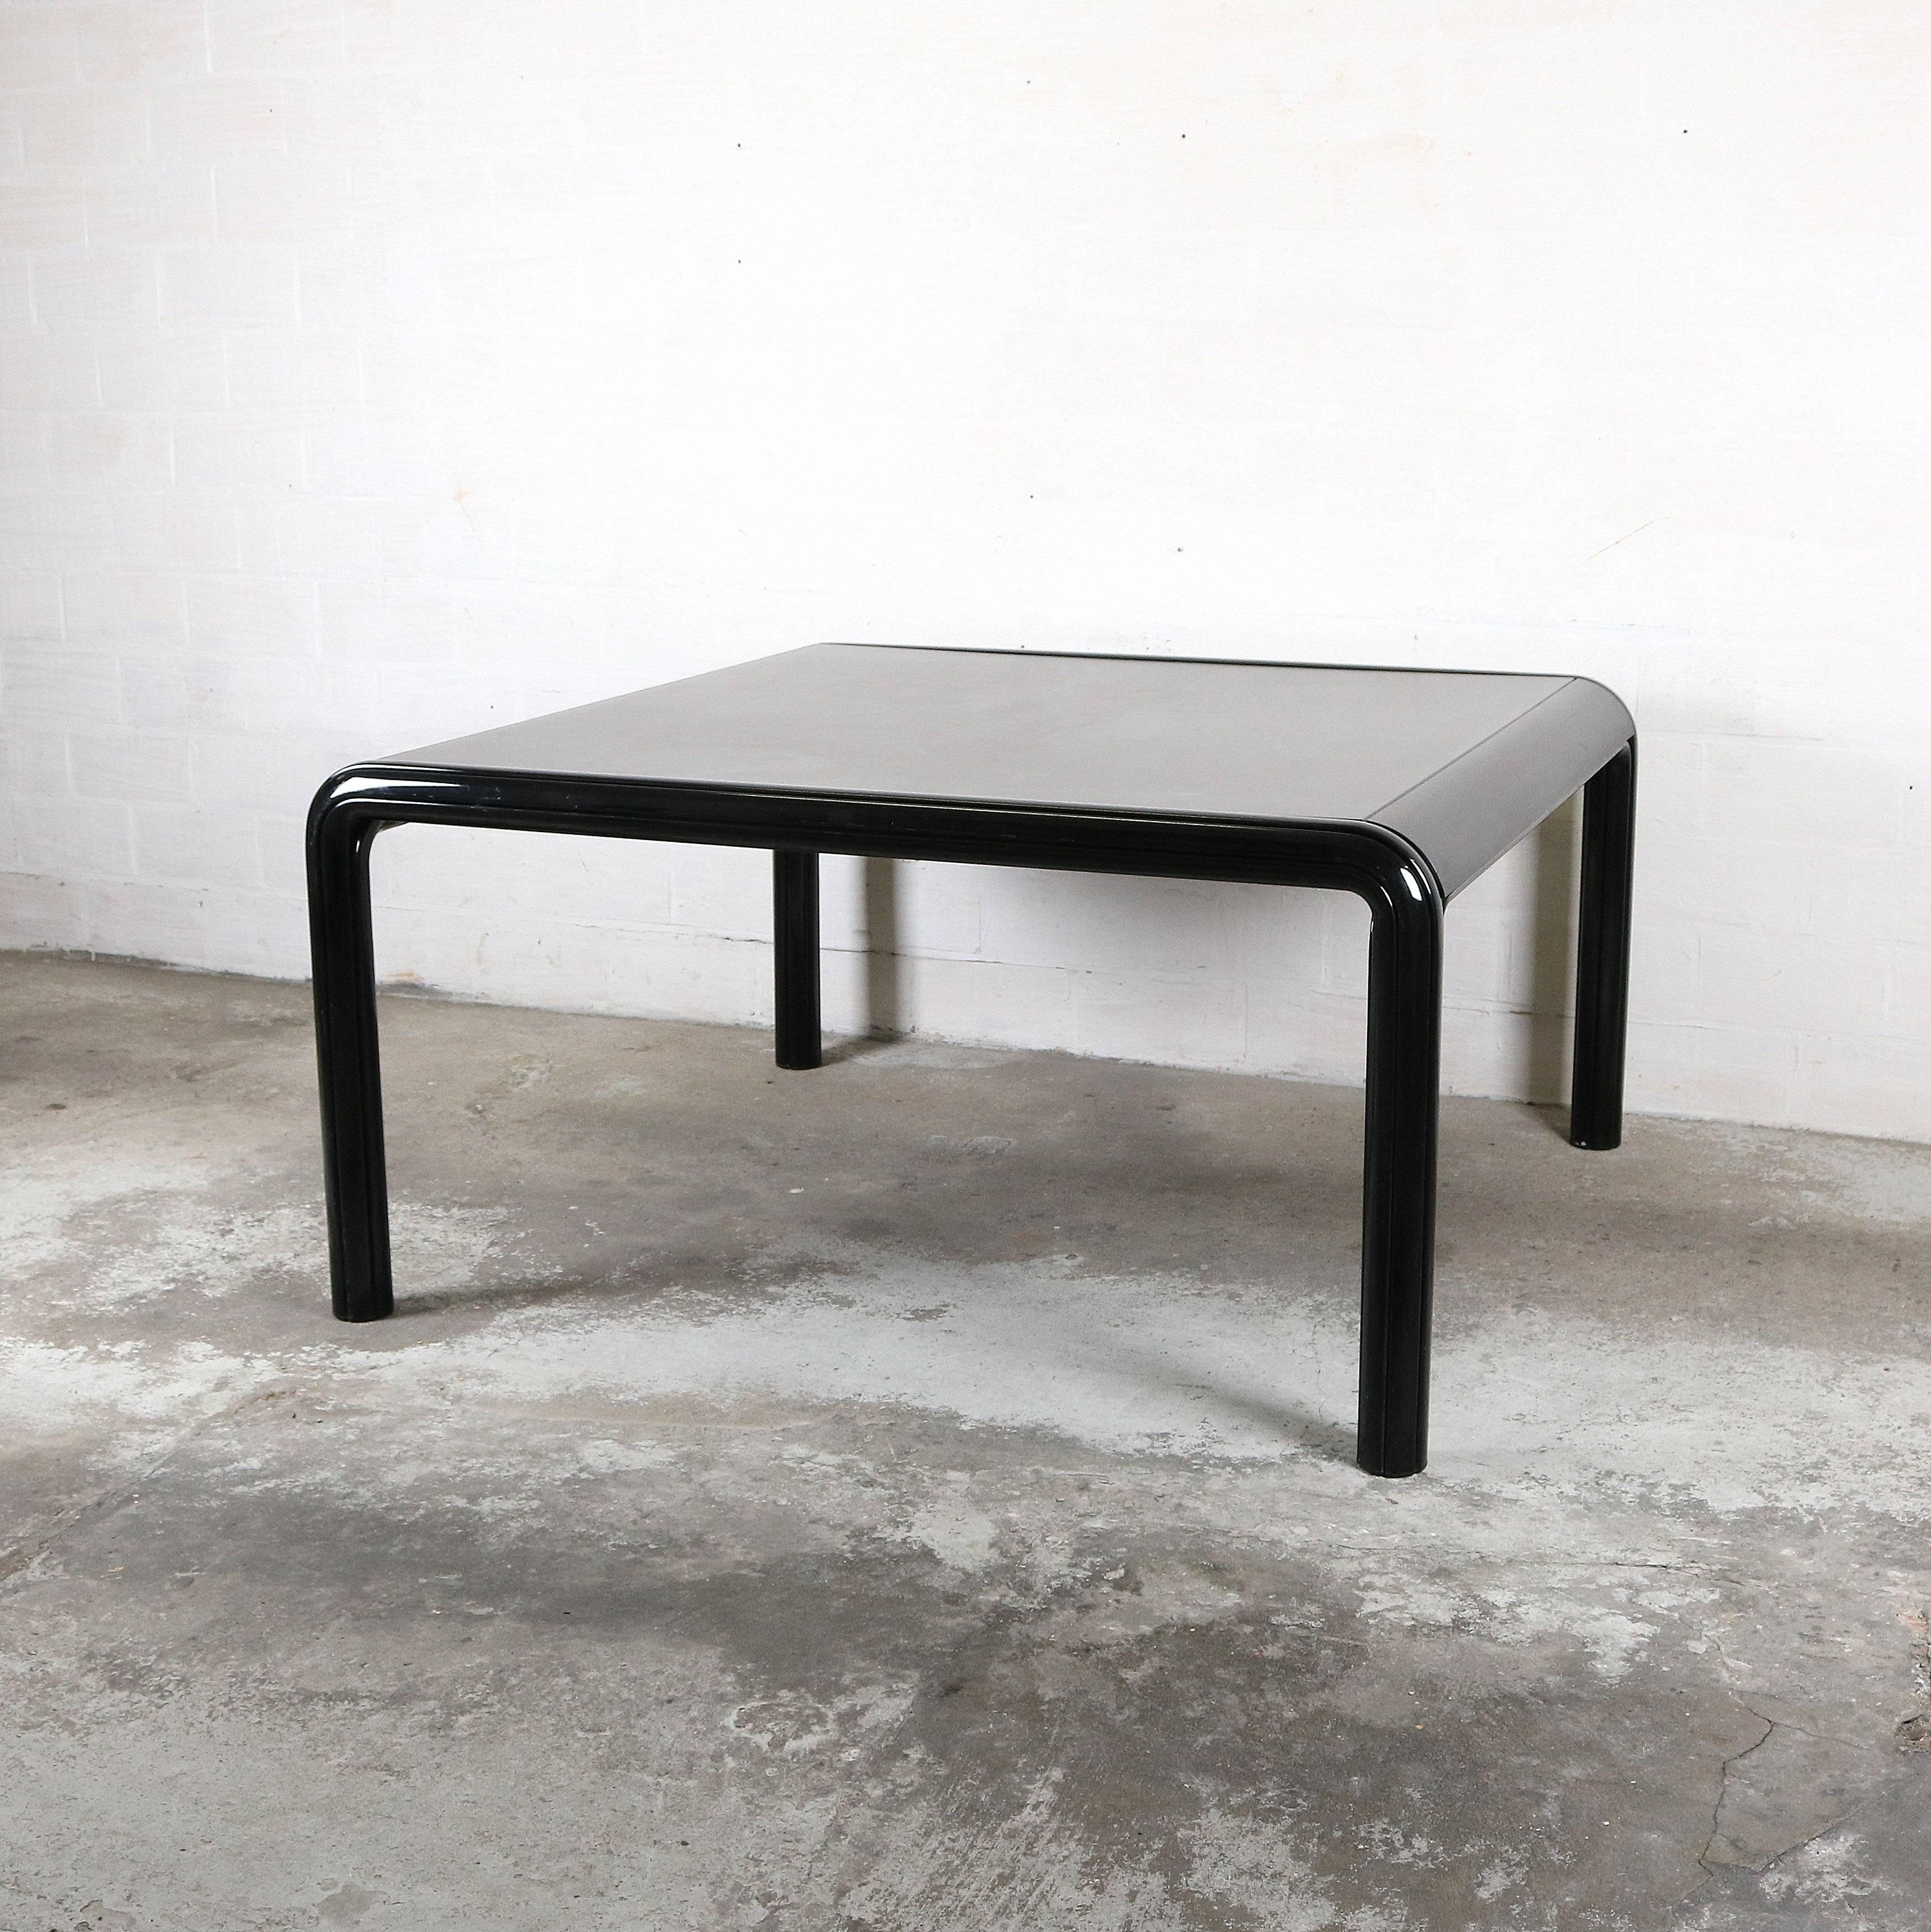 Table and eight chairs by designer Gae Aulenti for Knoll.
Table made of black aluminum frame and laminated top.
The chairs have a wool seat.

Dimensions of seats:
Height: 83 cm
Width: 57 cm
Depth: 48 cm
Seat height: 45 cm.